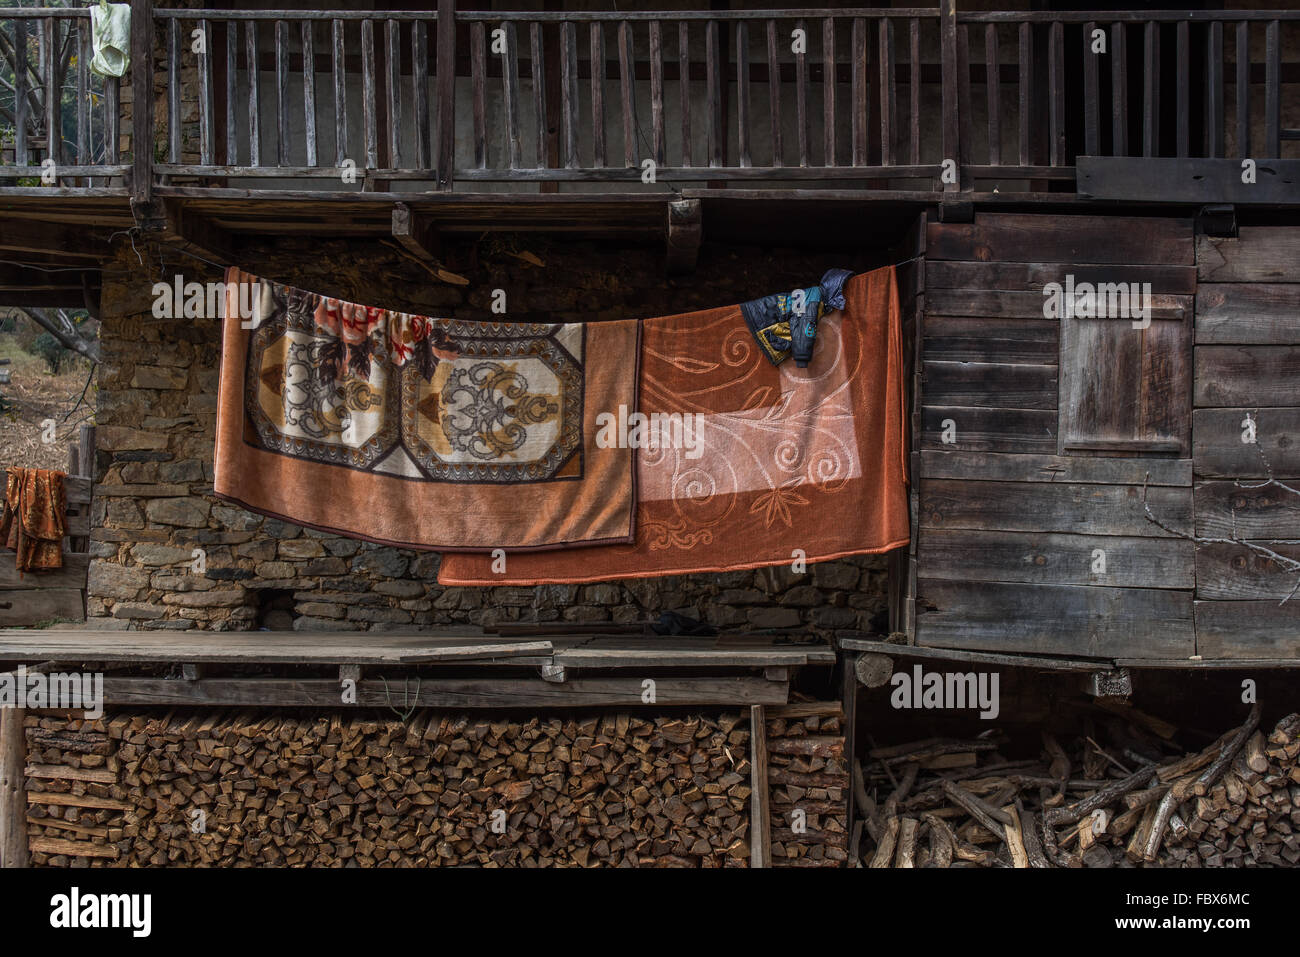 Thick warm blankets hung to air outside a traditional wooden house front in the village of Sangti, Arunachal Pradesh, INDIA. Stock Photo